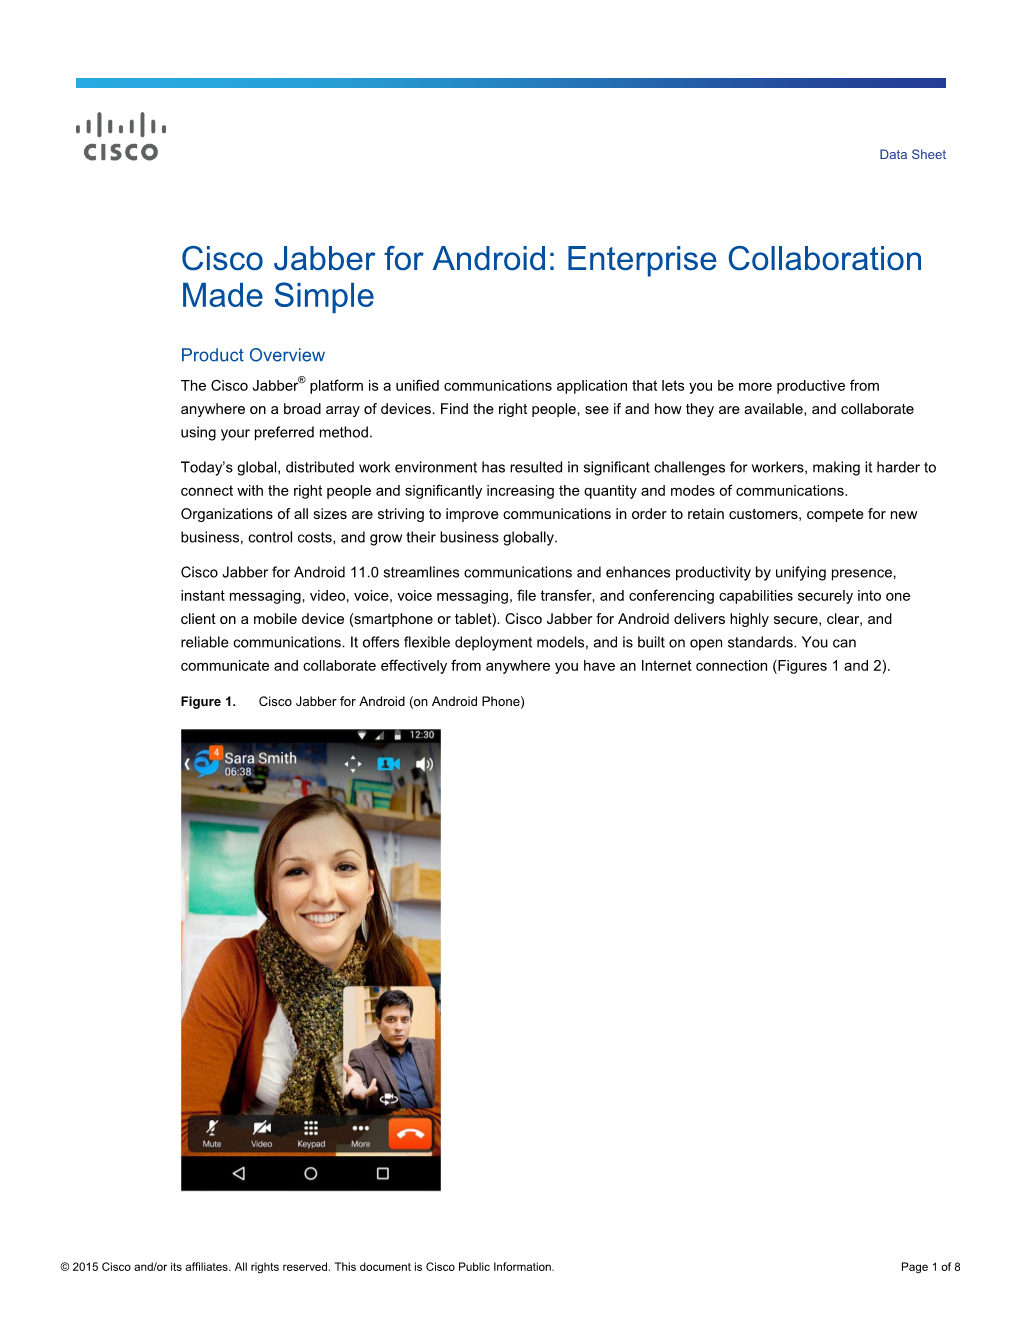 Cisco Jabber for Android: Enterprise Collaboration Made Simple